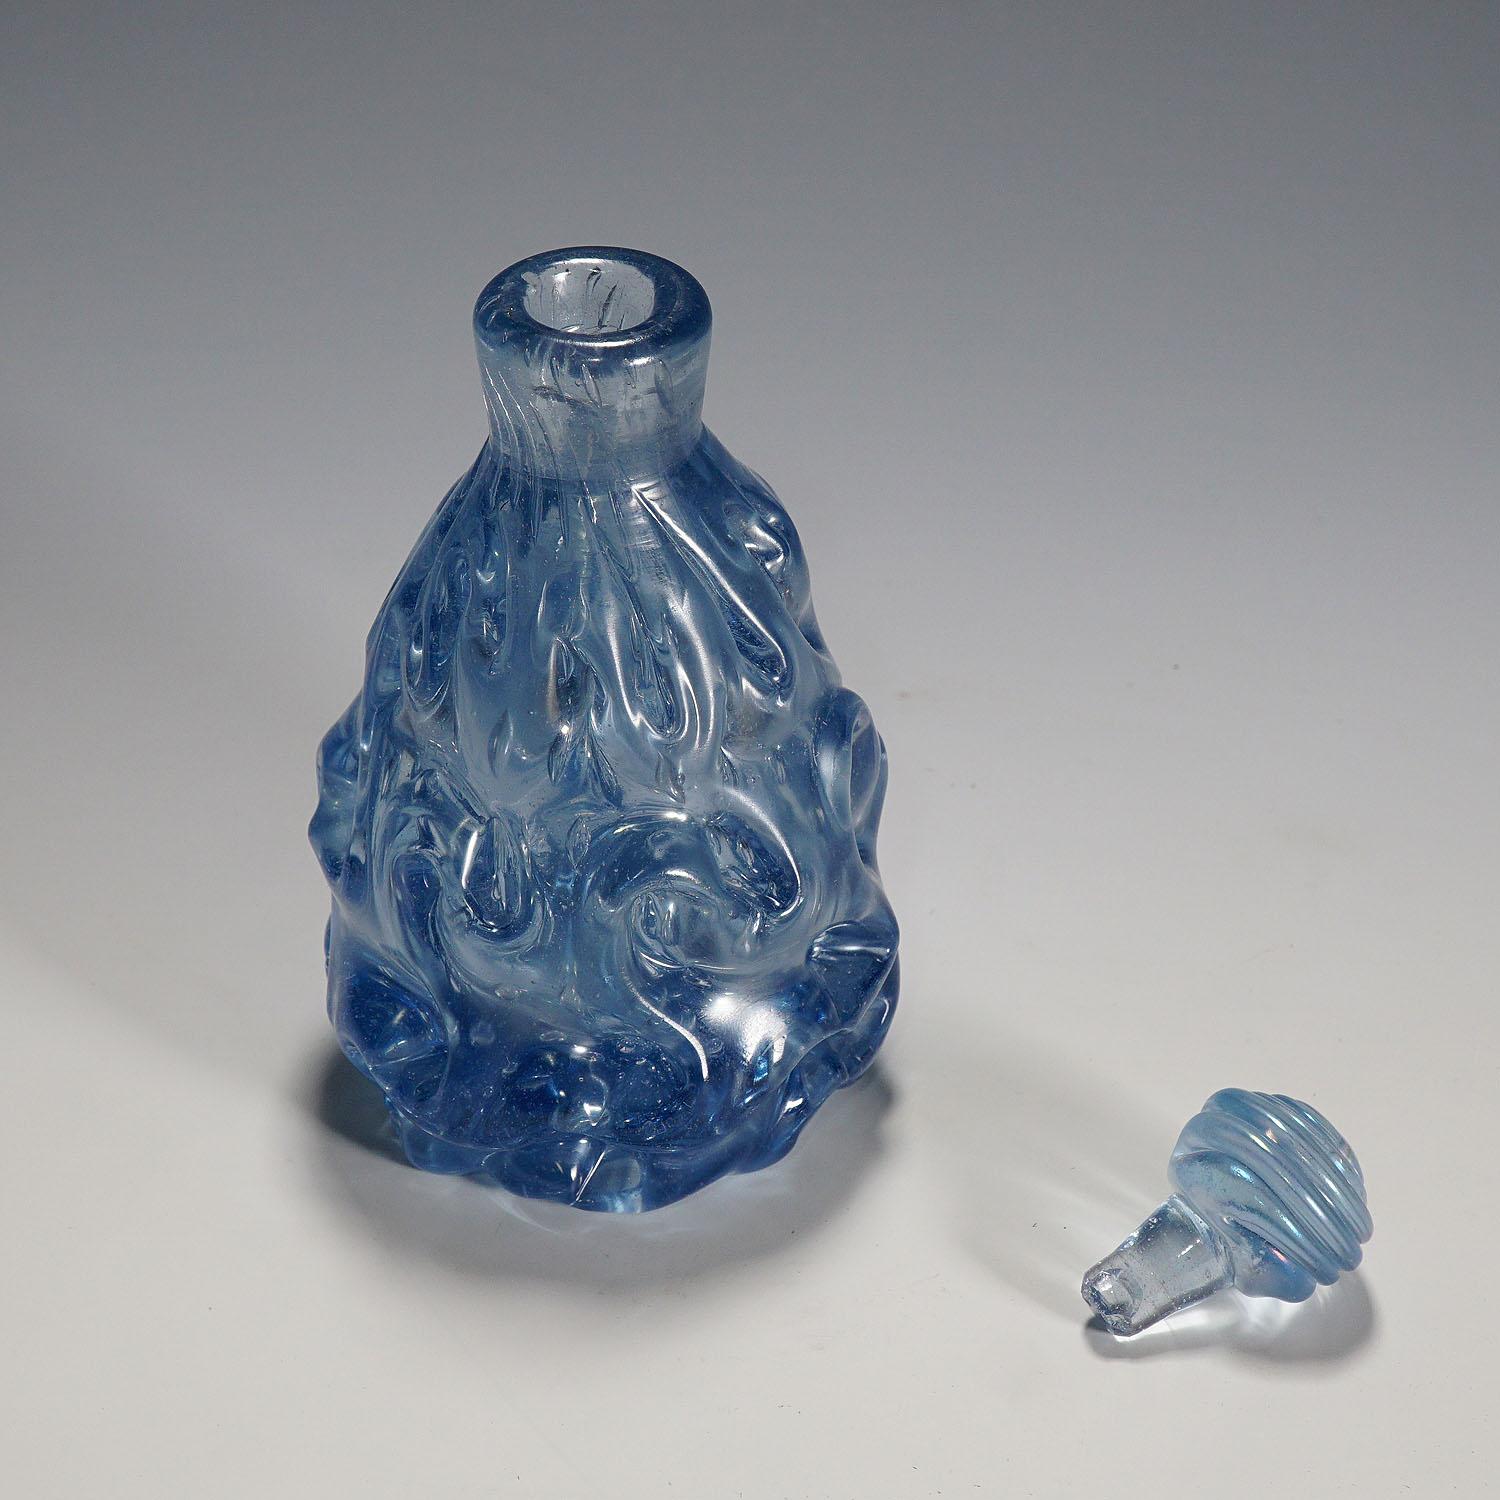 Vintage Murano Art Glass Flacon by Barovier & Toso 'attr.' ca. 1950 For Sale 1